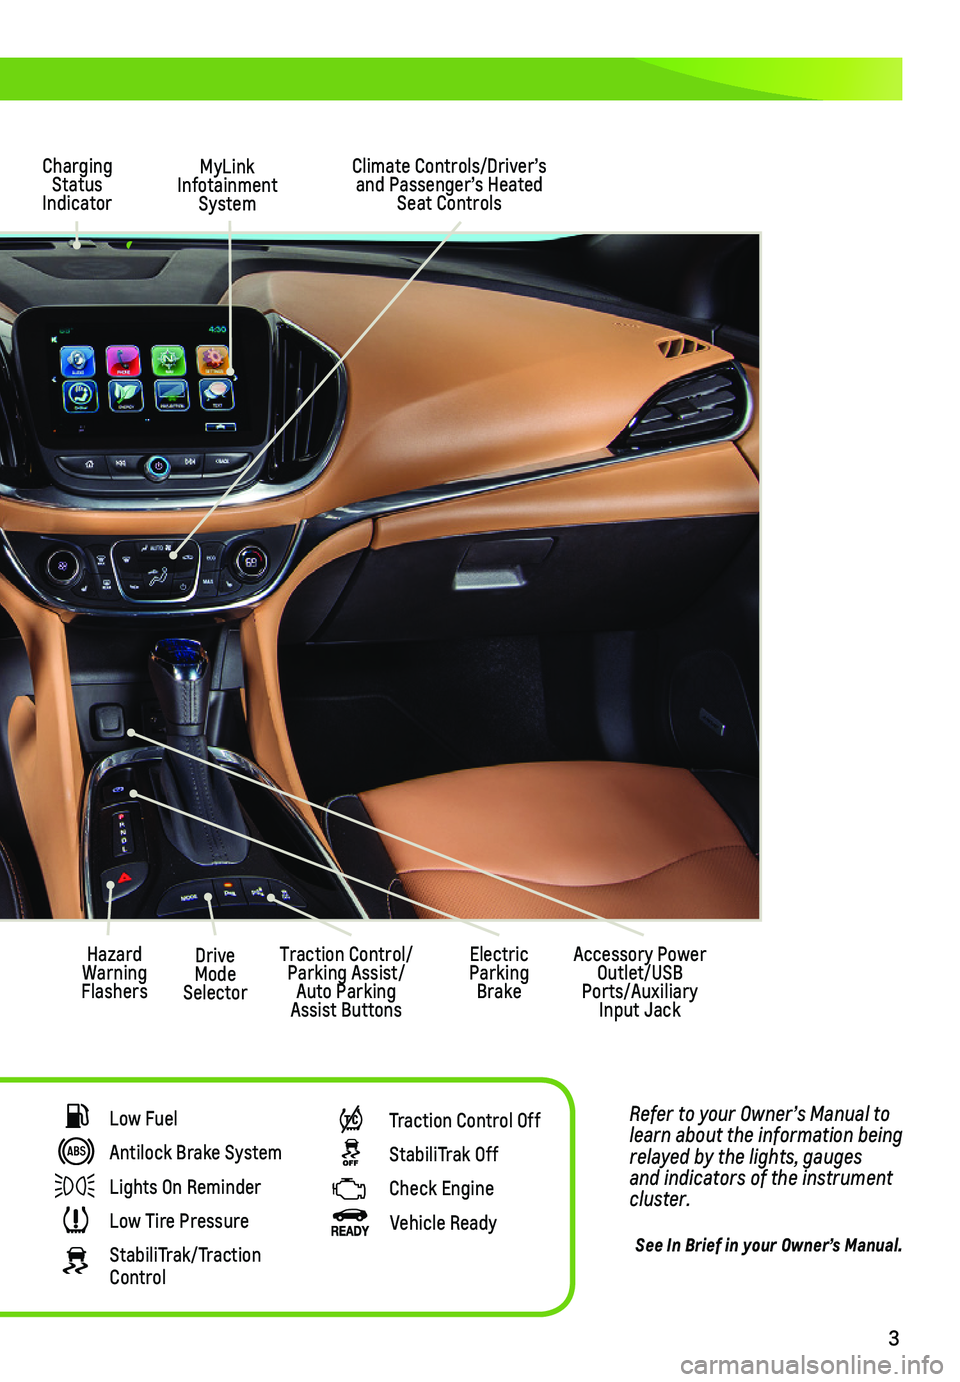 CHEVROLET VOLT 2018  Get To Know Guide 3
Refer to your Owner’s Manual to learn about the information being relayed by the lights, gauges and indicators of the instrument cluster.
See In Brief in your Owner’s Manual.
MyLink Infotainment